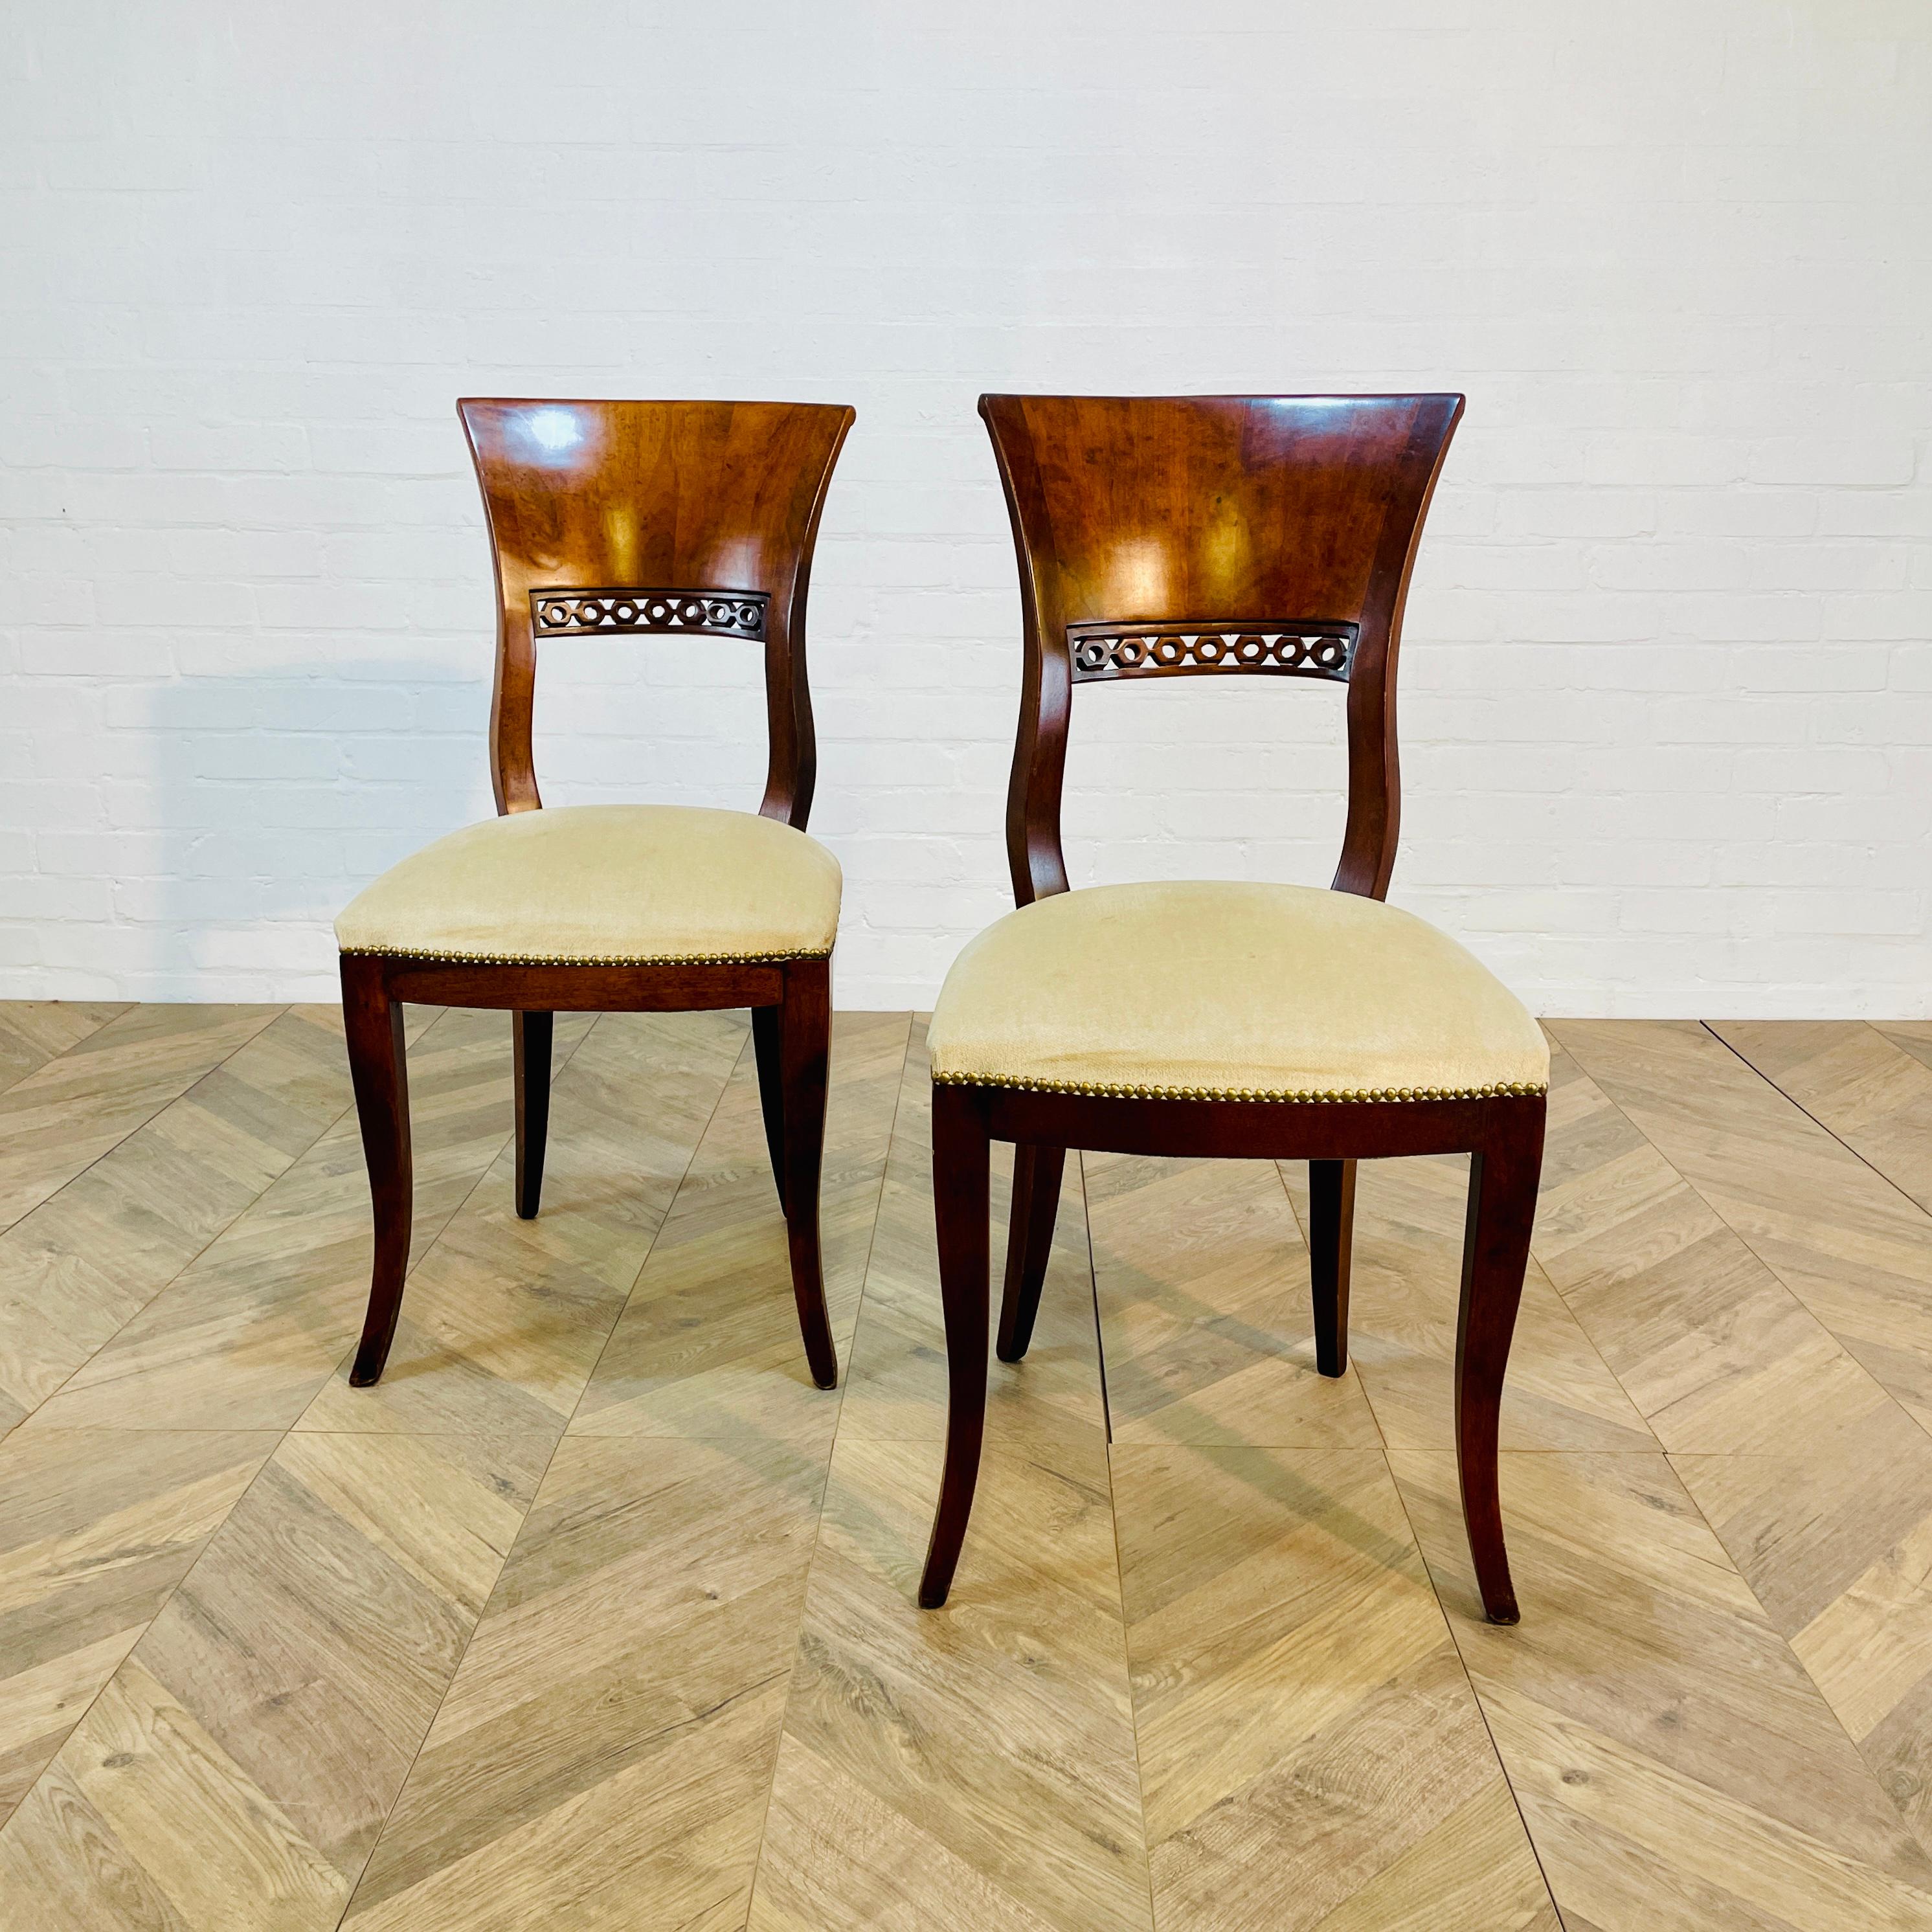 A Beautiful Pair of European Antique Biedermeier Mahogany Side Chairs, circa 1830s. 

The chairs are in wonderful condition with lovely details. The seats are upholstered in beige fabric (potentially professionally upholstered at a later